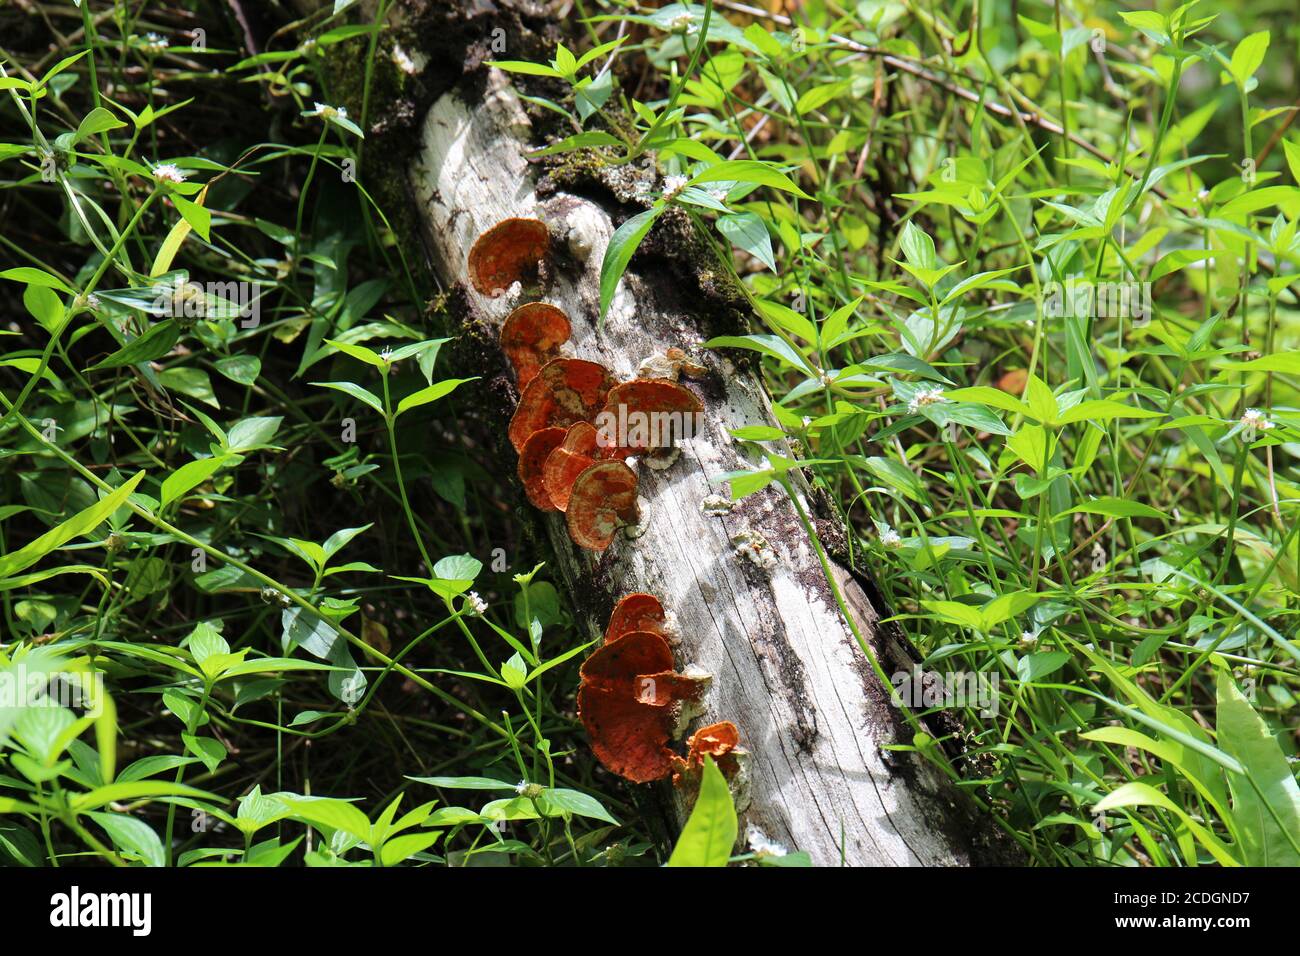 Orange and brown Polyporales fungi on a rotting log surrounded by plants in Maui, Hawaii, USA Stock Photo